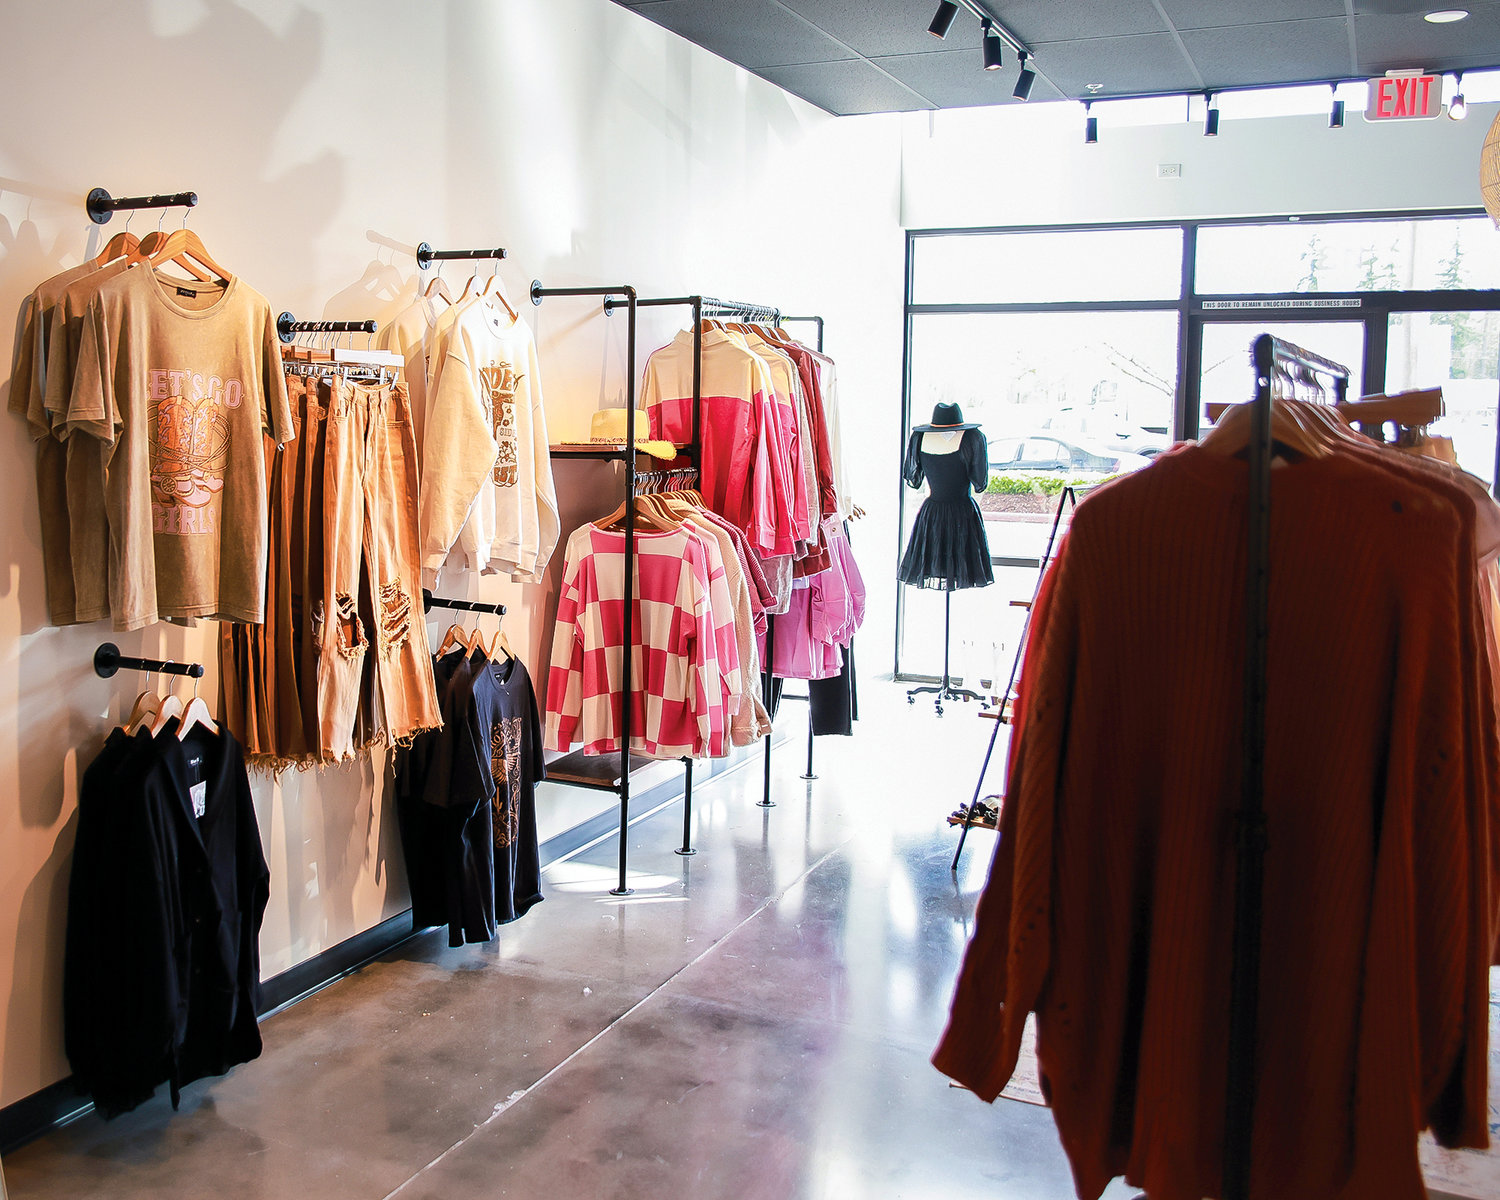 Union Boutique NW offers a wide variety of in-season women's clothing as well as locally made gift items including candles, jewlery and more as seen Tuesday, March 7.